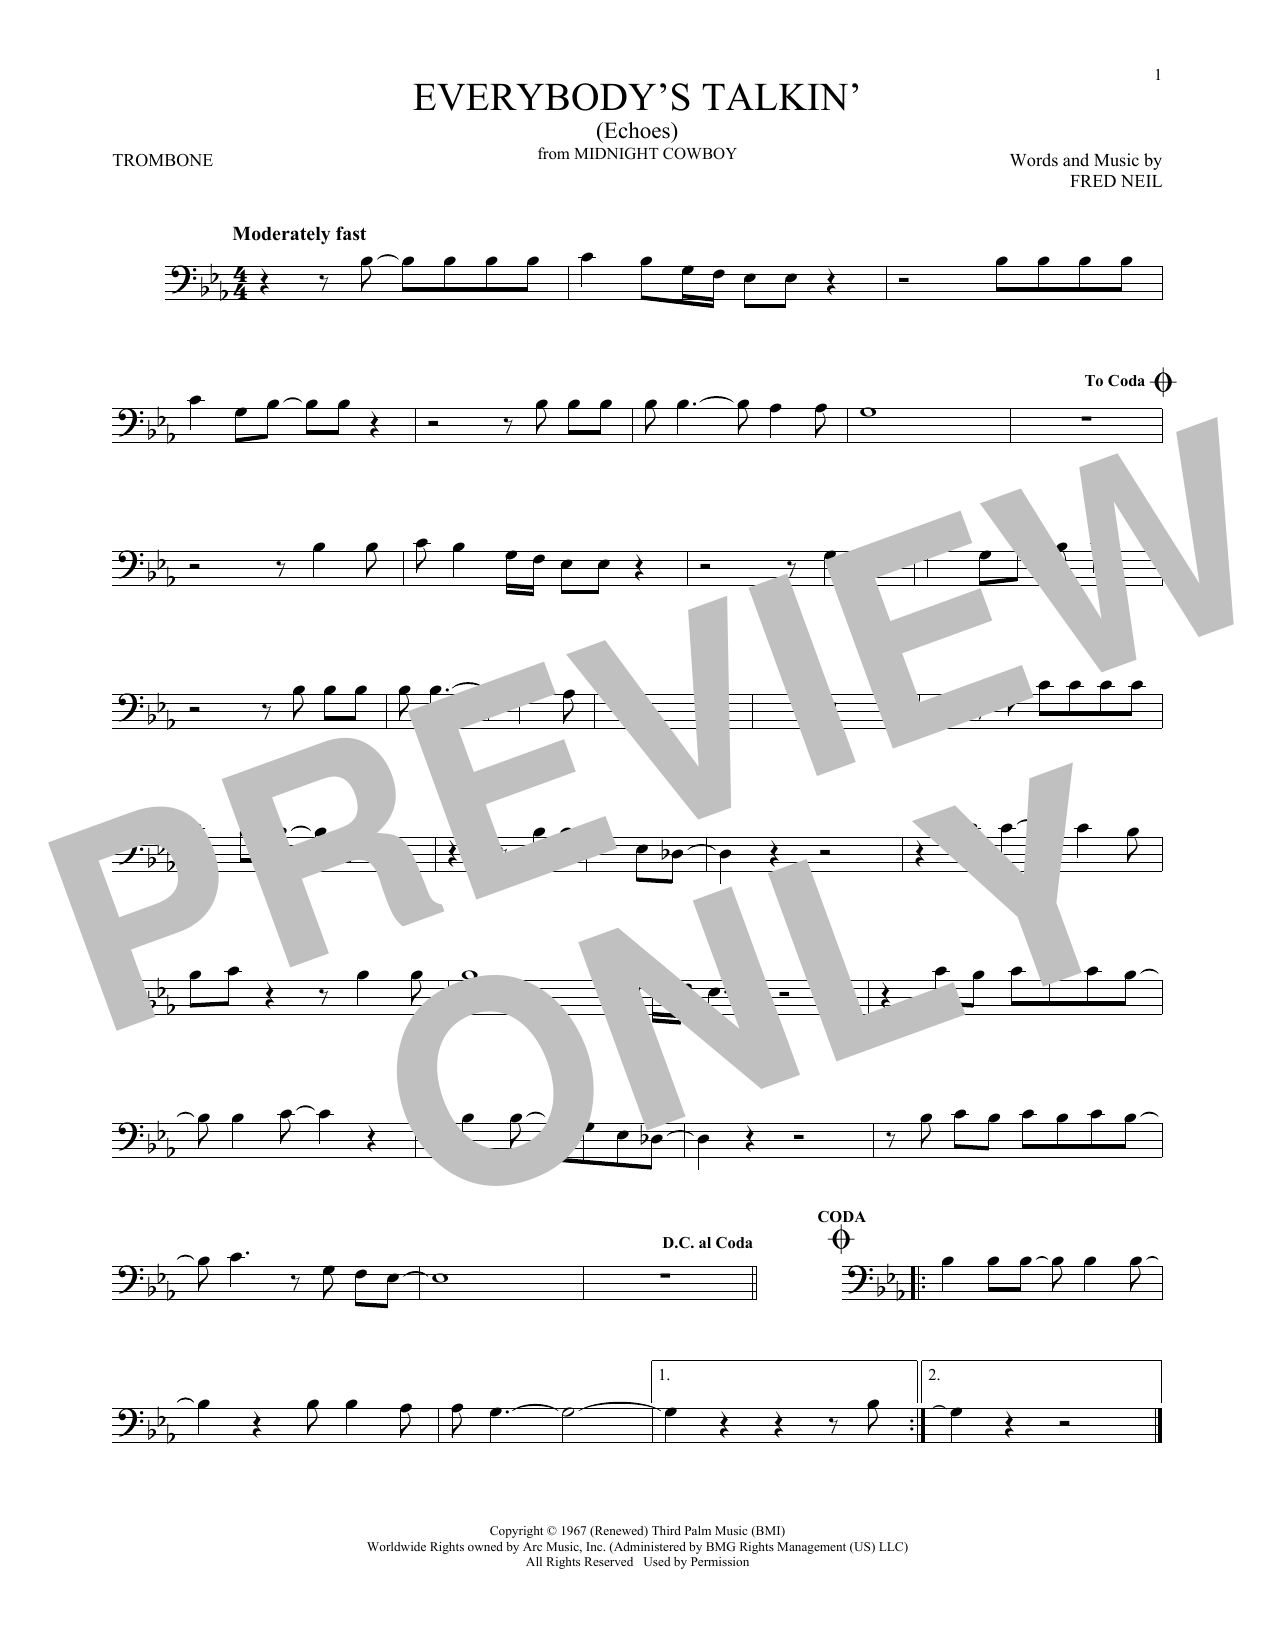 Download Harry Nilsson Everybody's Talkin' (Echoes) Sheet Music